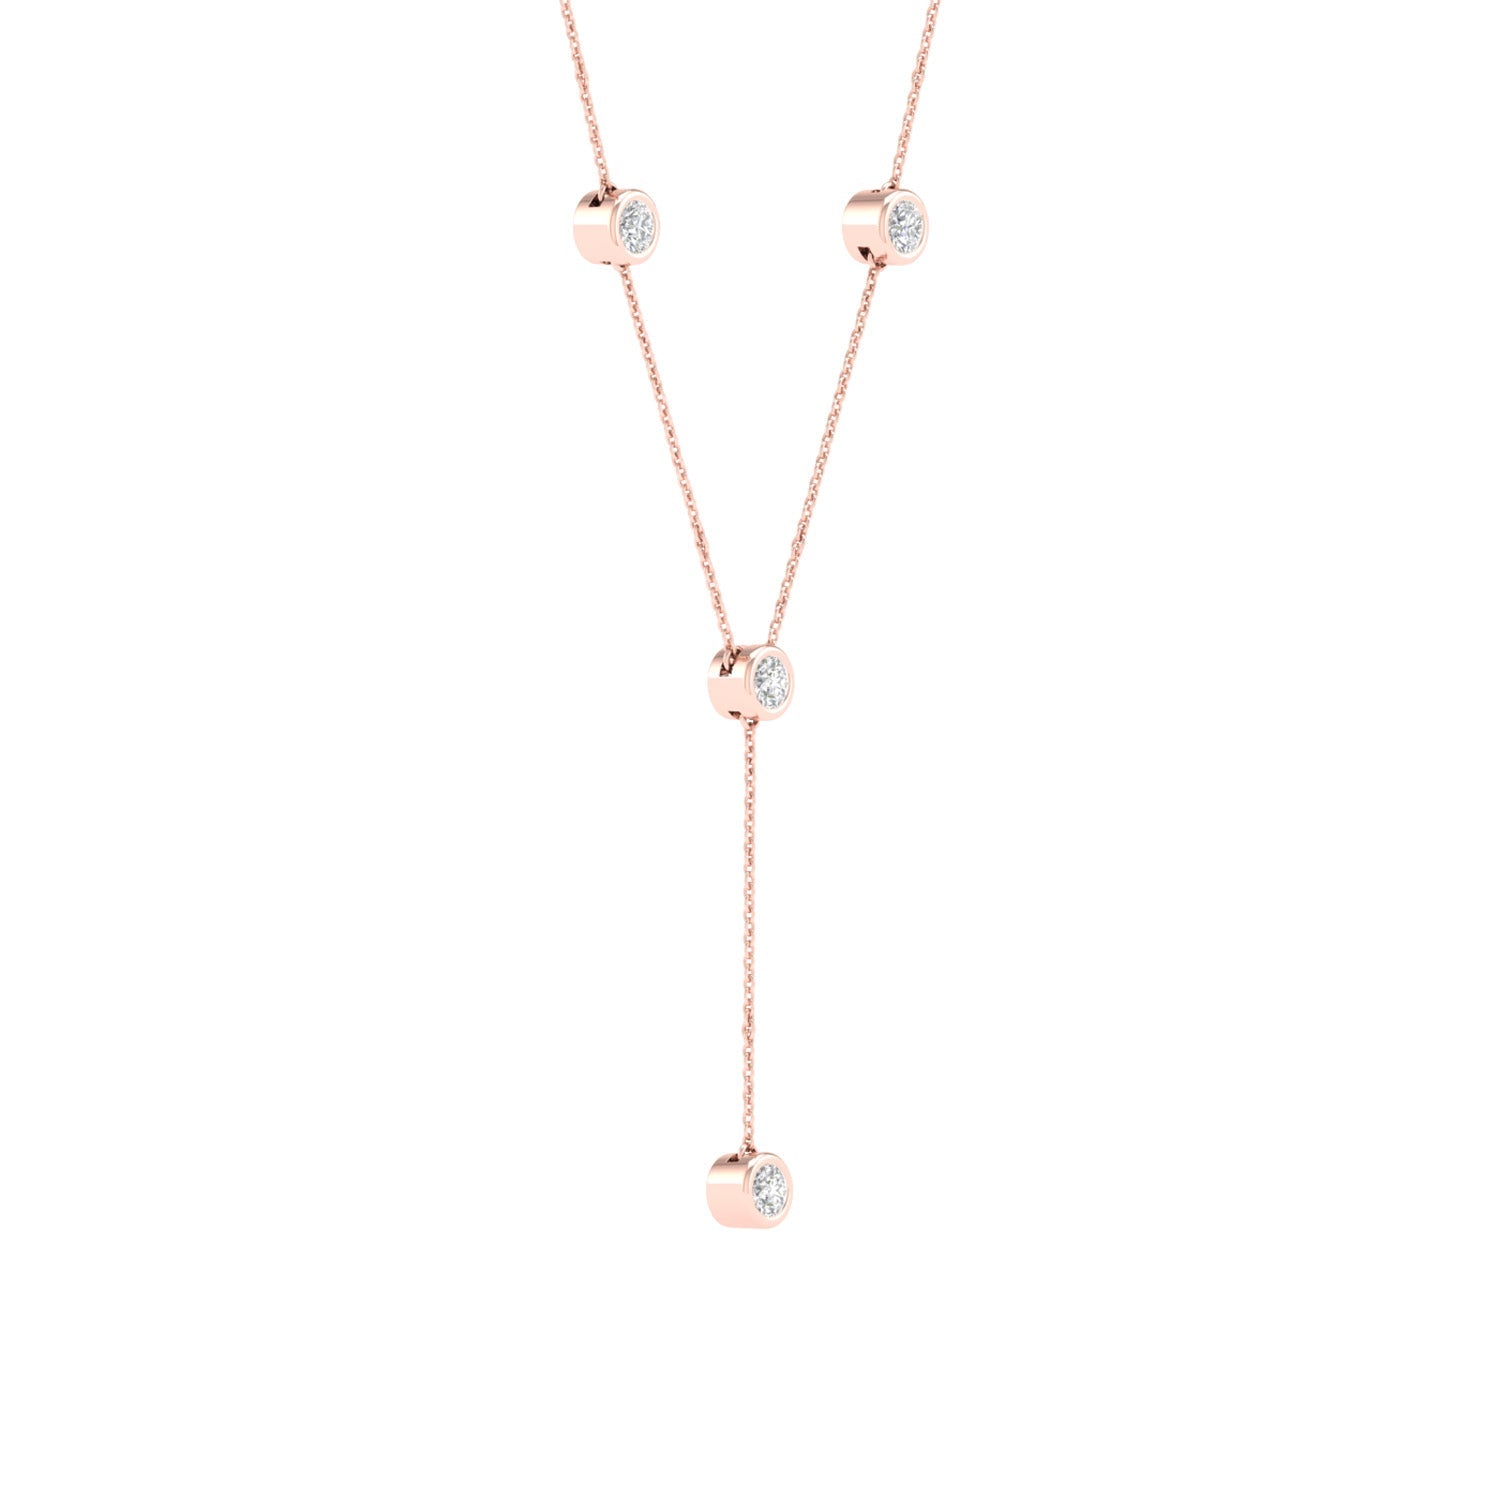 Encompassing Round Stationed Y Necklace_Product angle_1/4 Ct. - 2